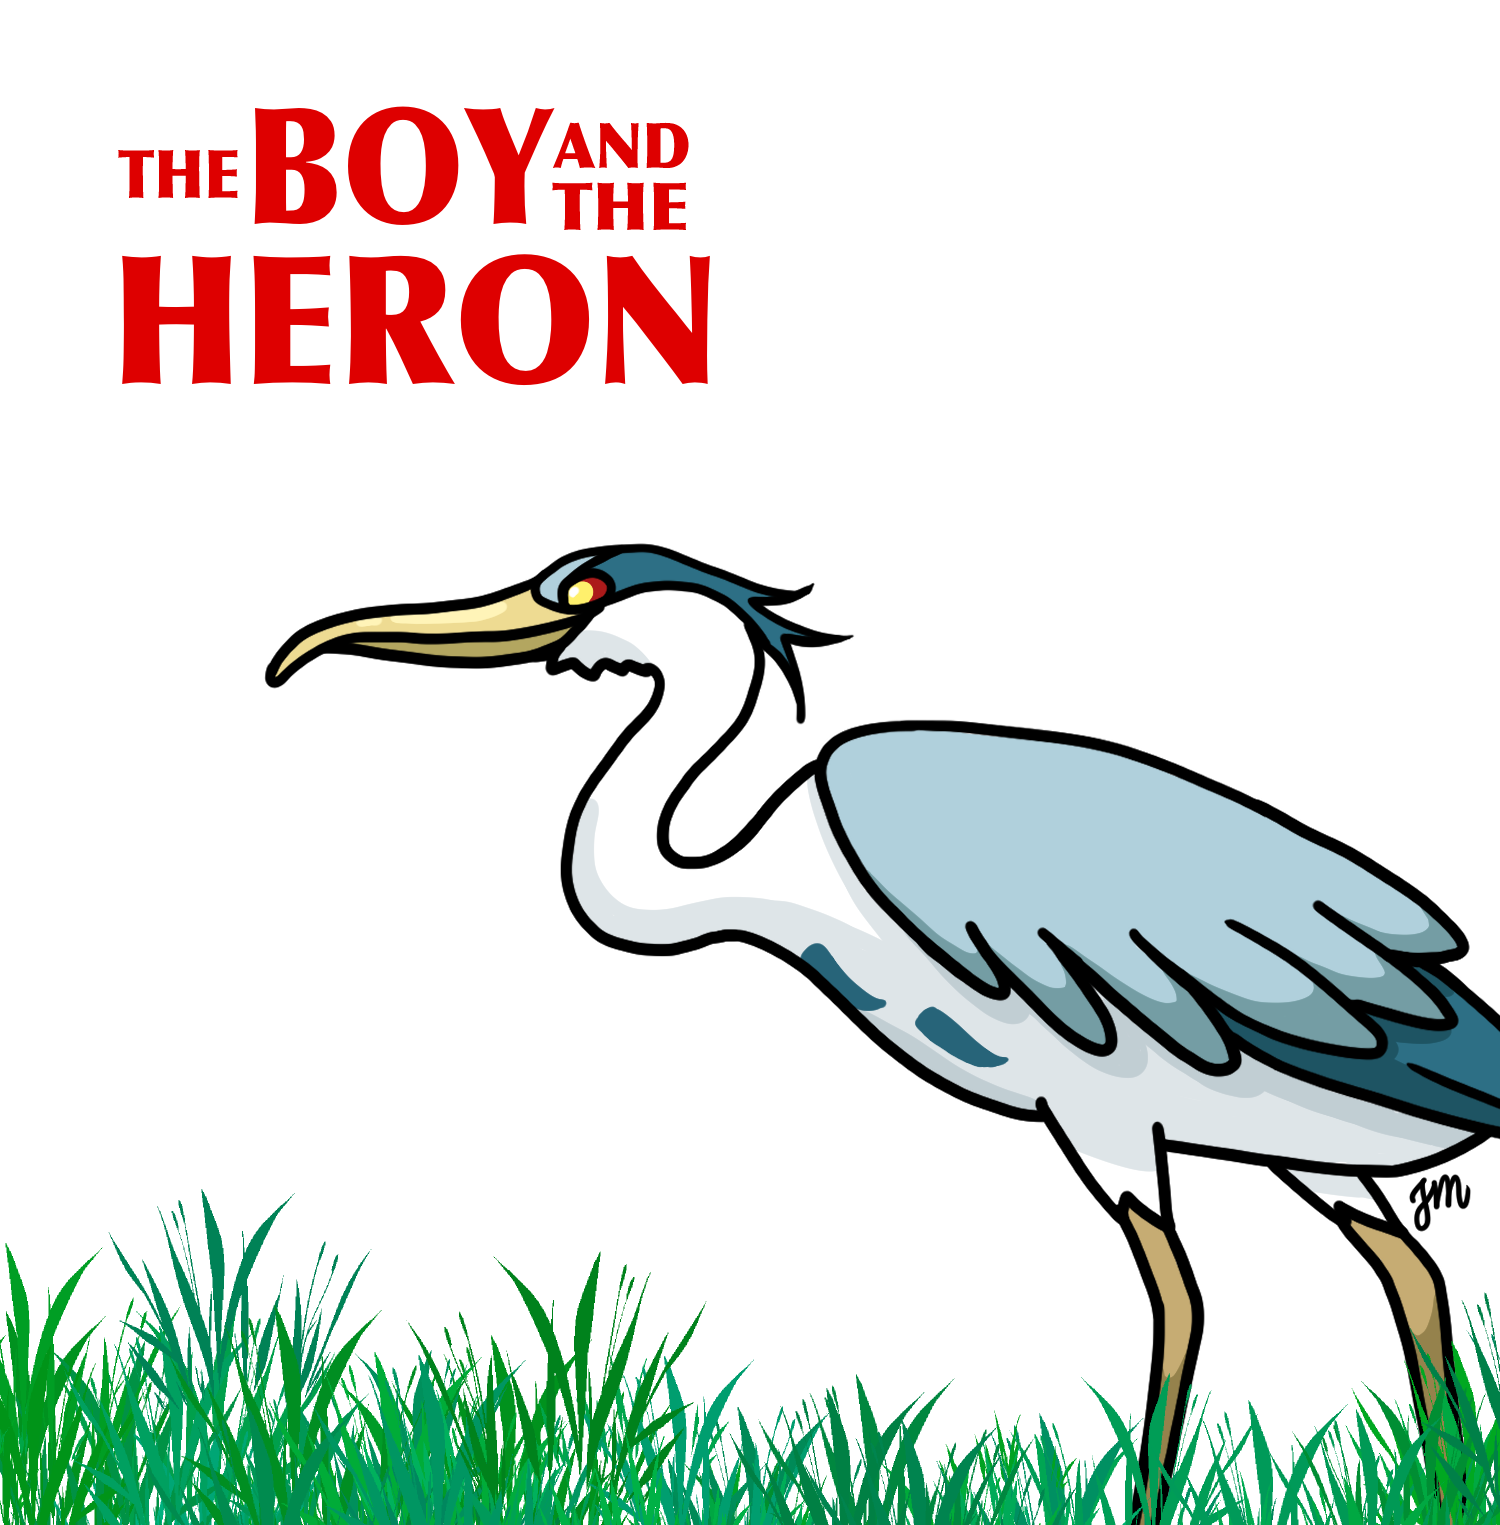 ‘The Boy and the Heron:’ A fun but thoughtful experience